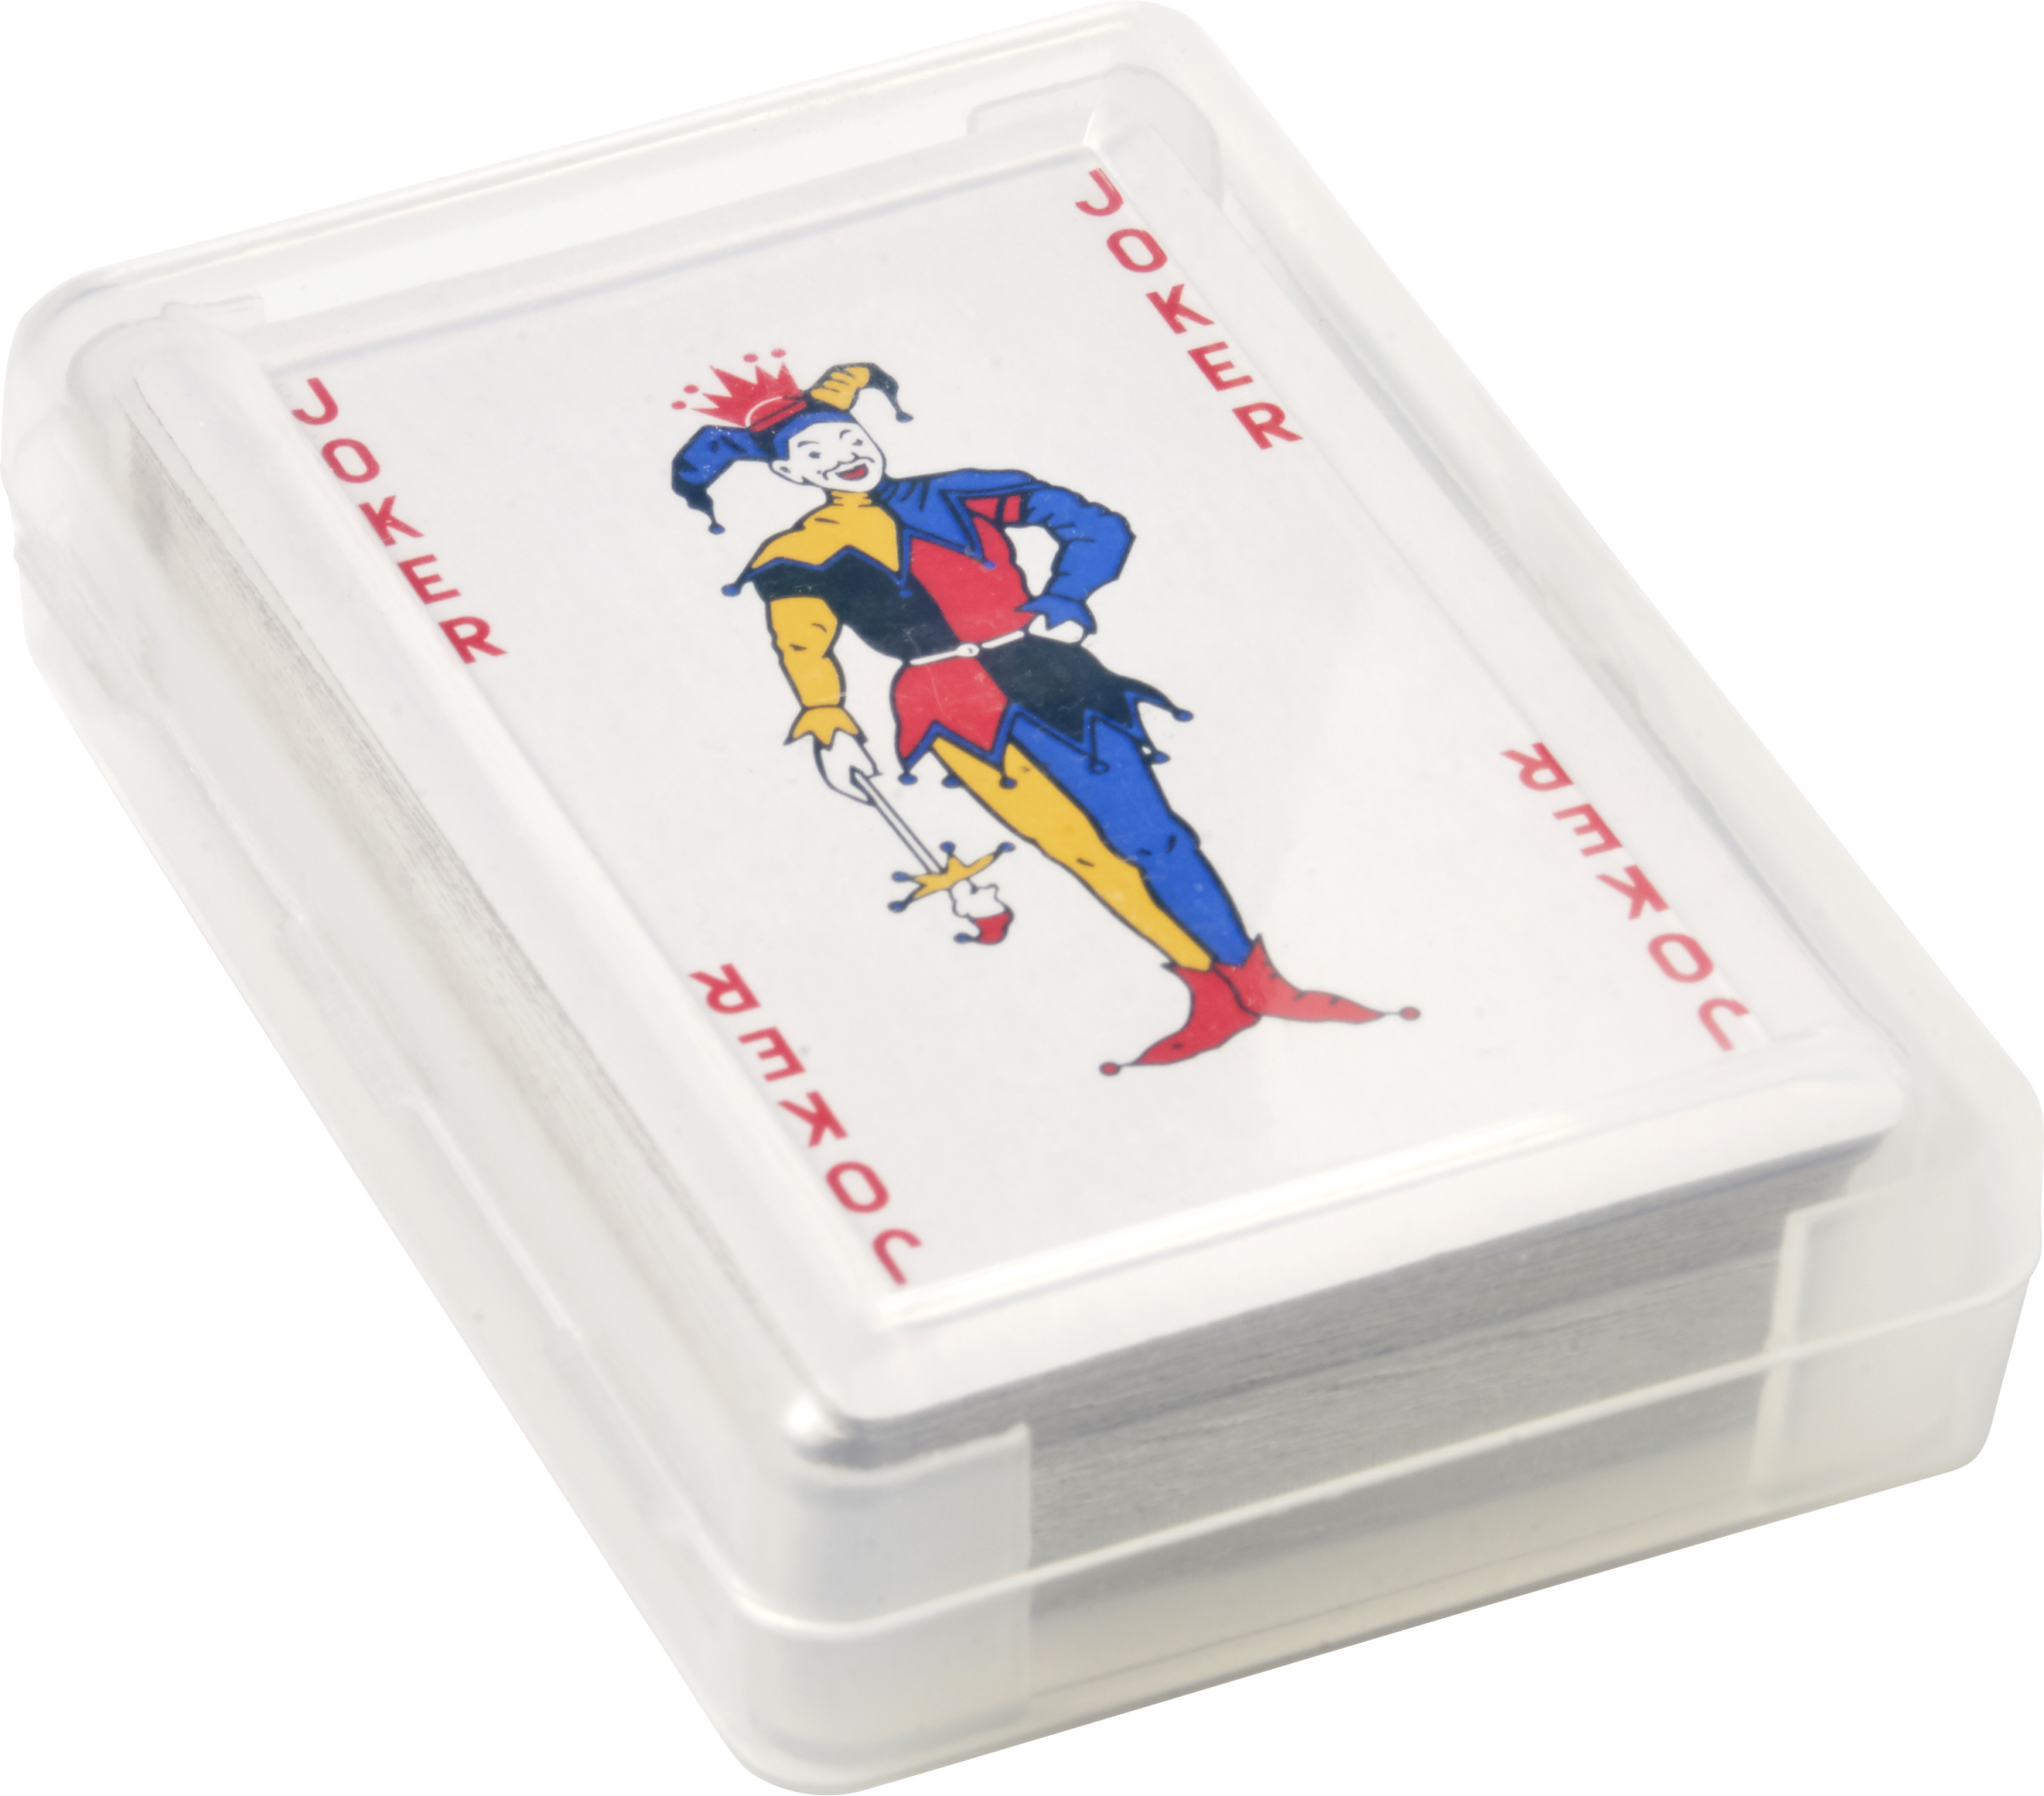 008546 008999999 3d045 rgt pro01 fal - Deck Of Cards In Plastic Case